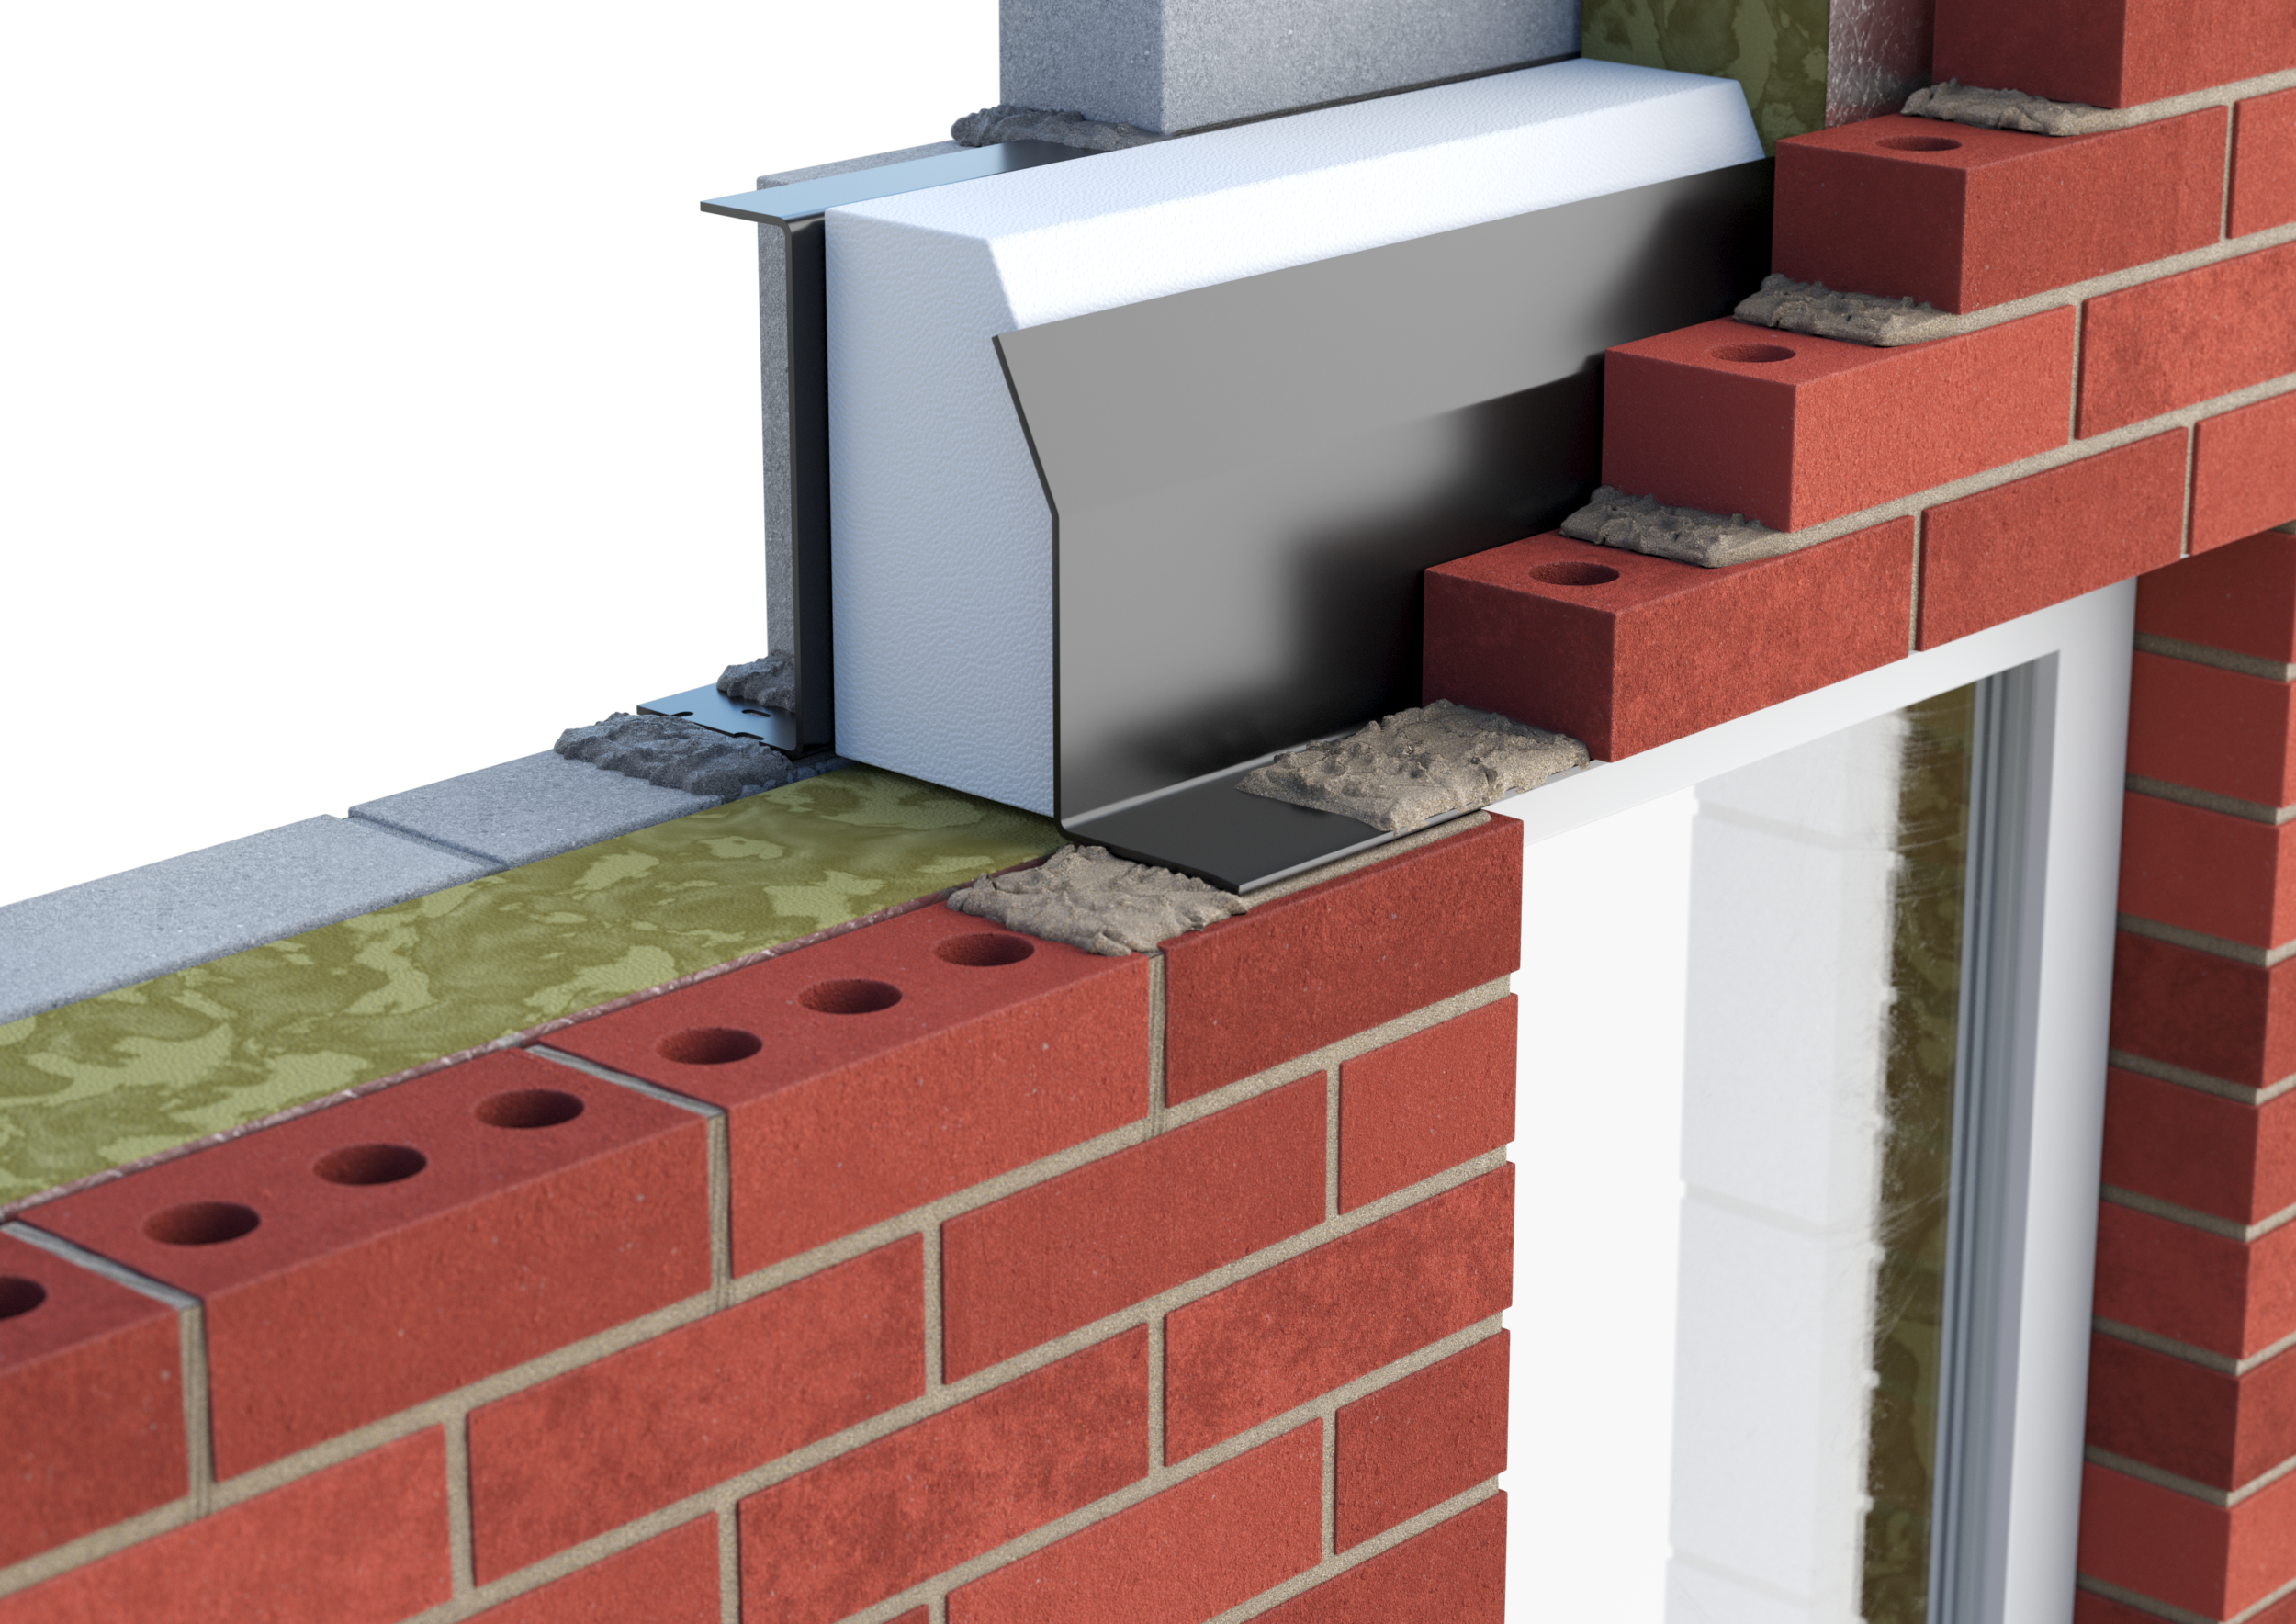 Catnic extra heavy duty thermally broken cavity wall lintel for 150-165mm cavity wall shown in situ